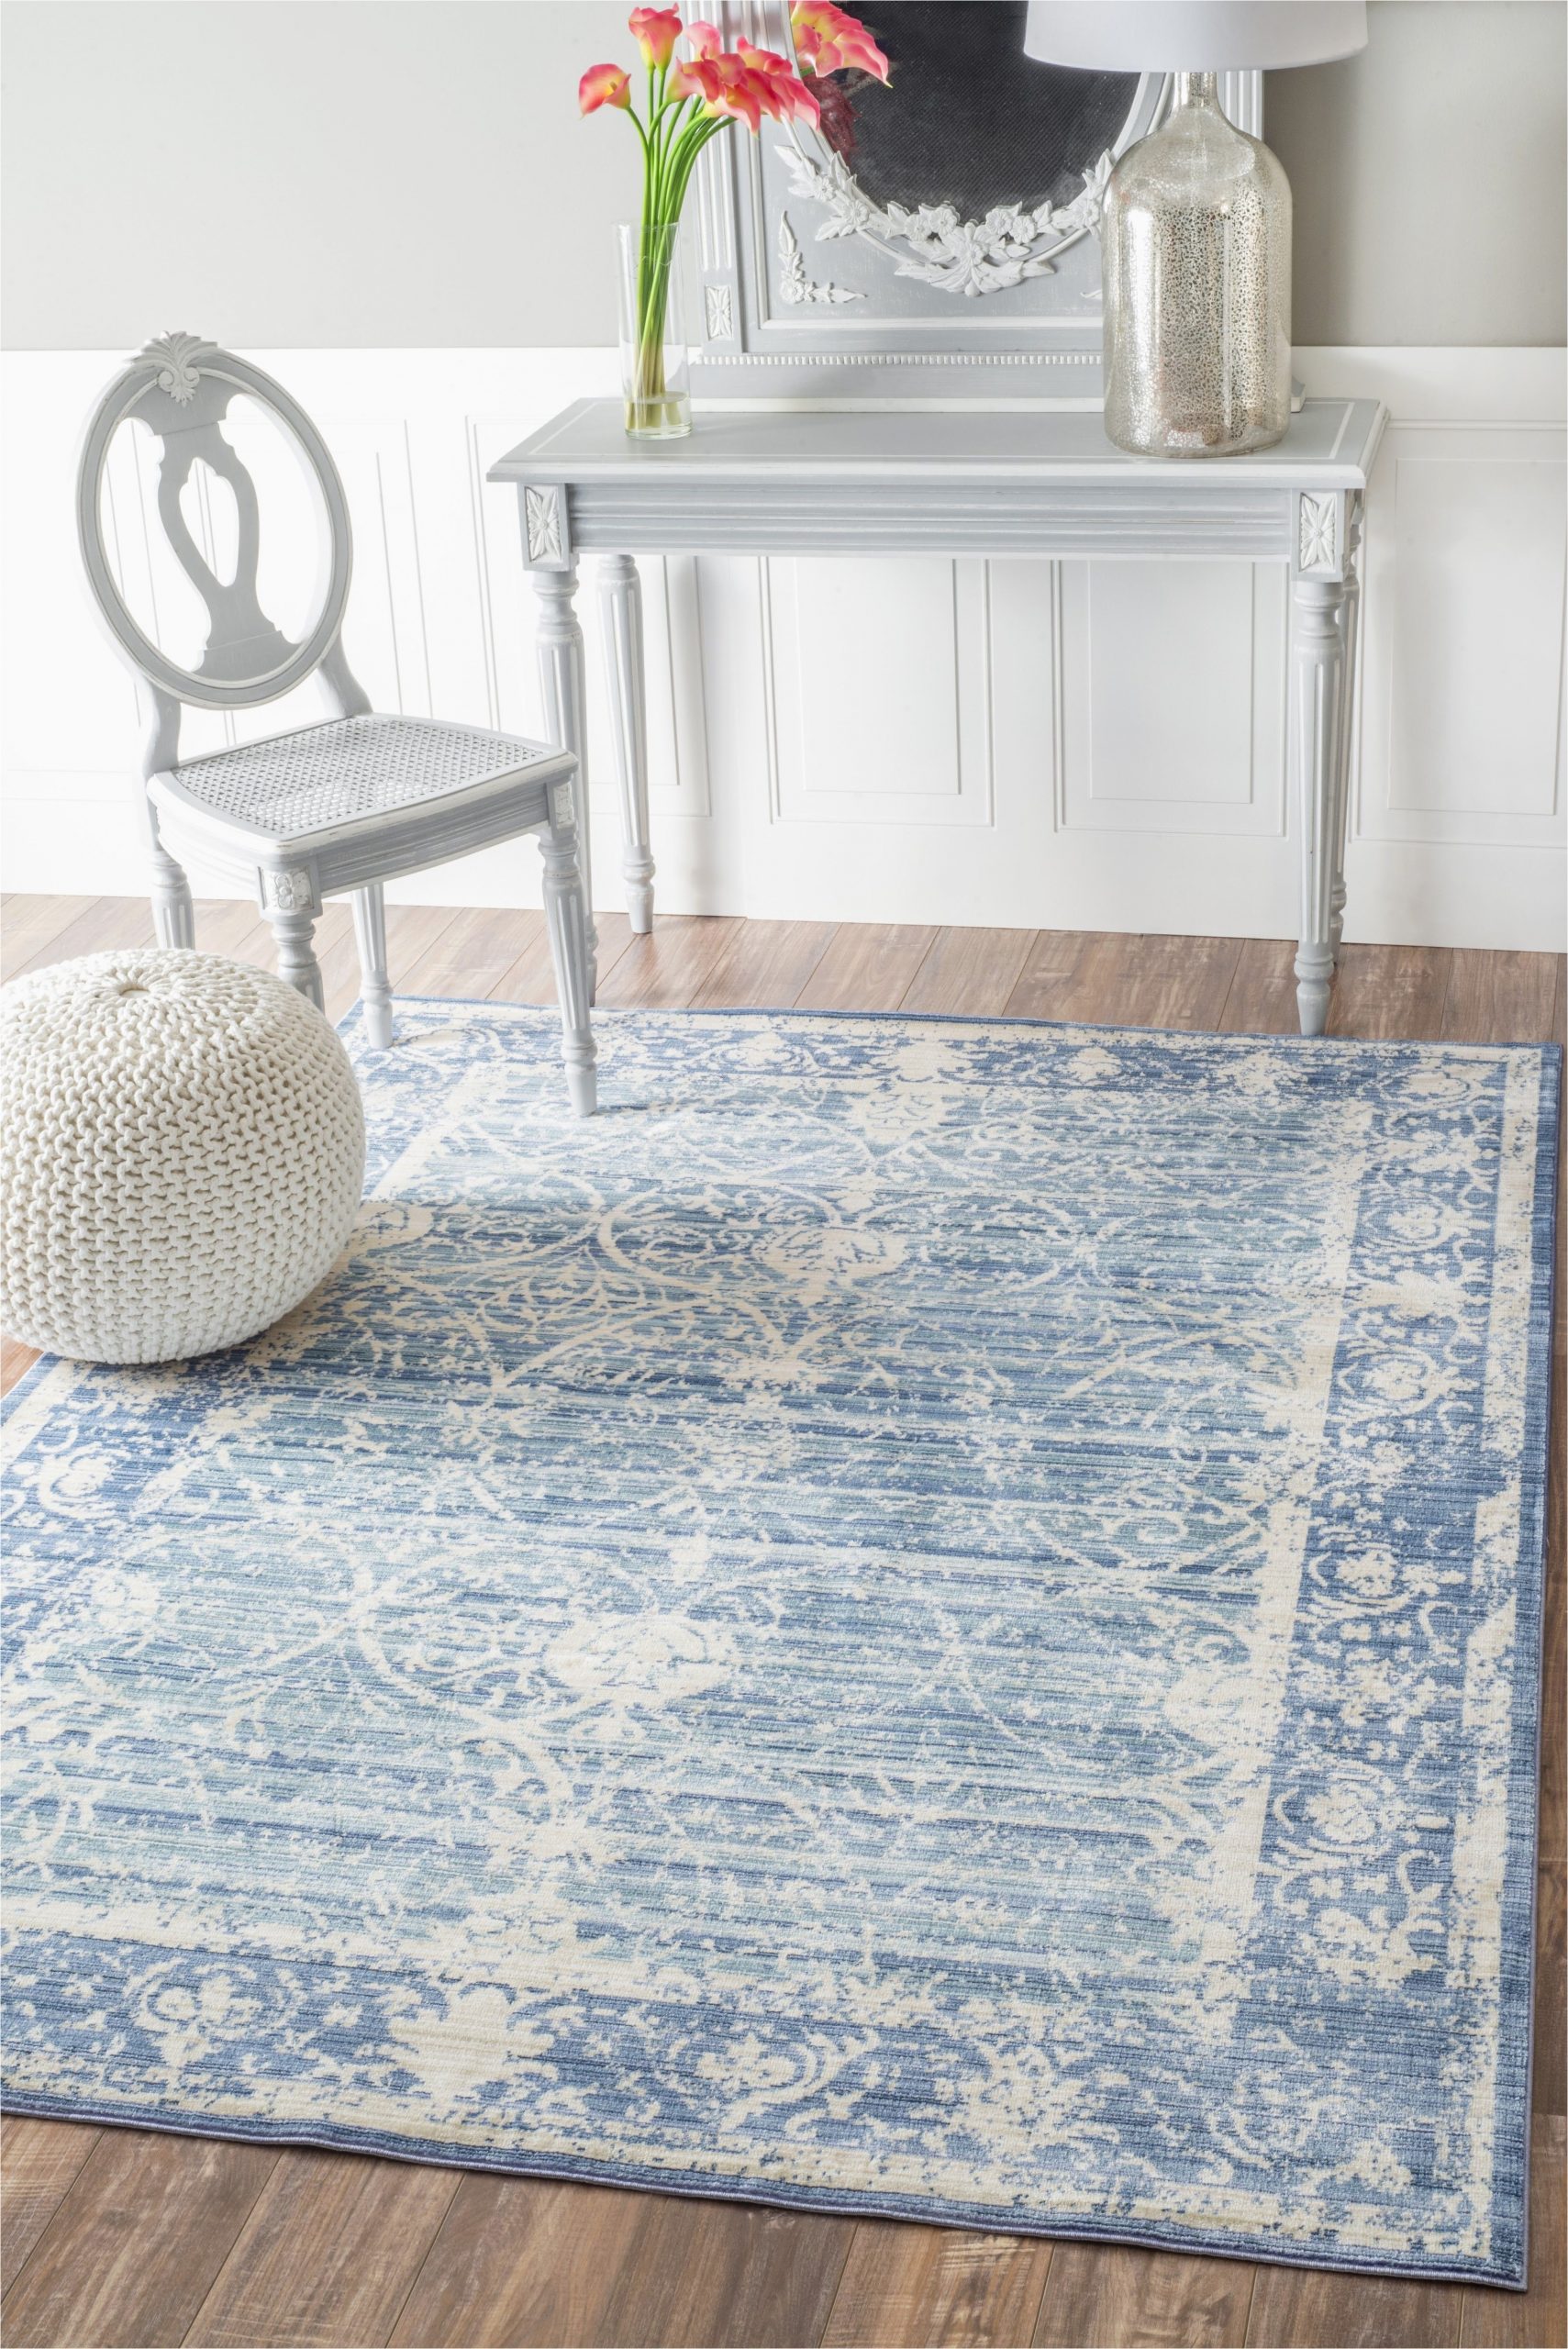 Grey White and Blue Rug A Fabulous Blue and White Rug From One Of Rugs Usas New